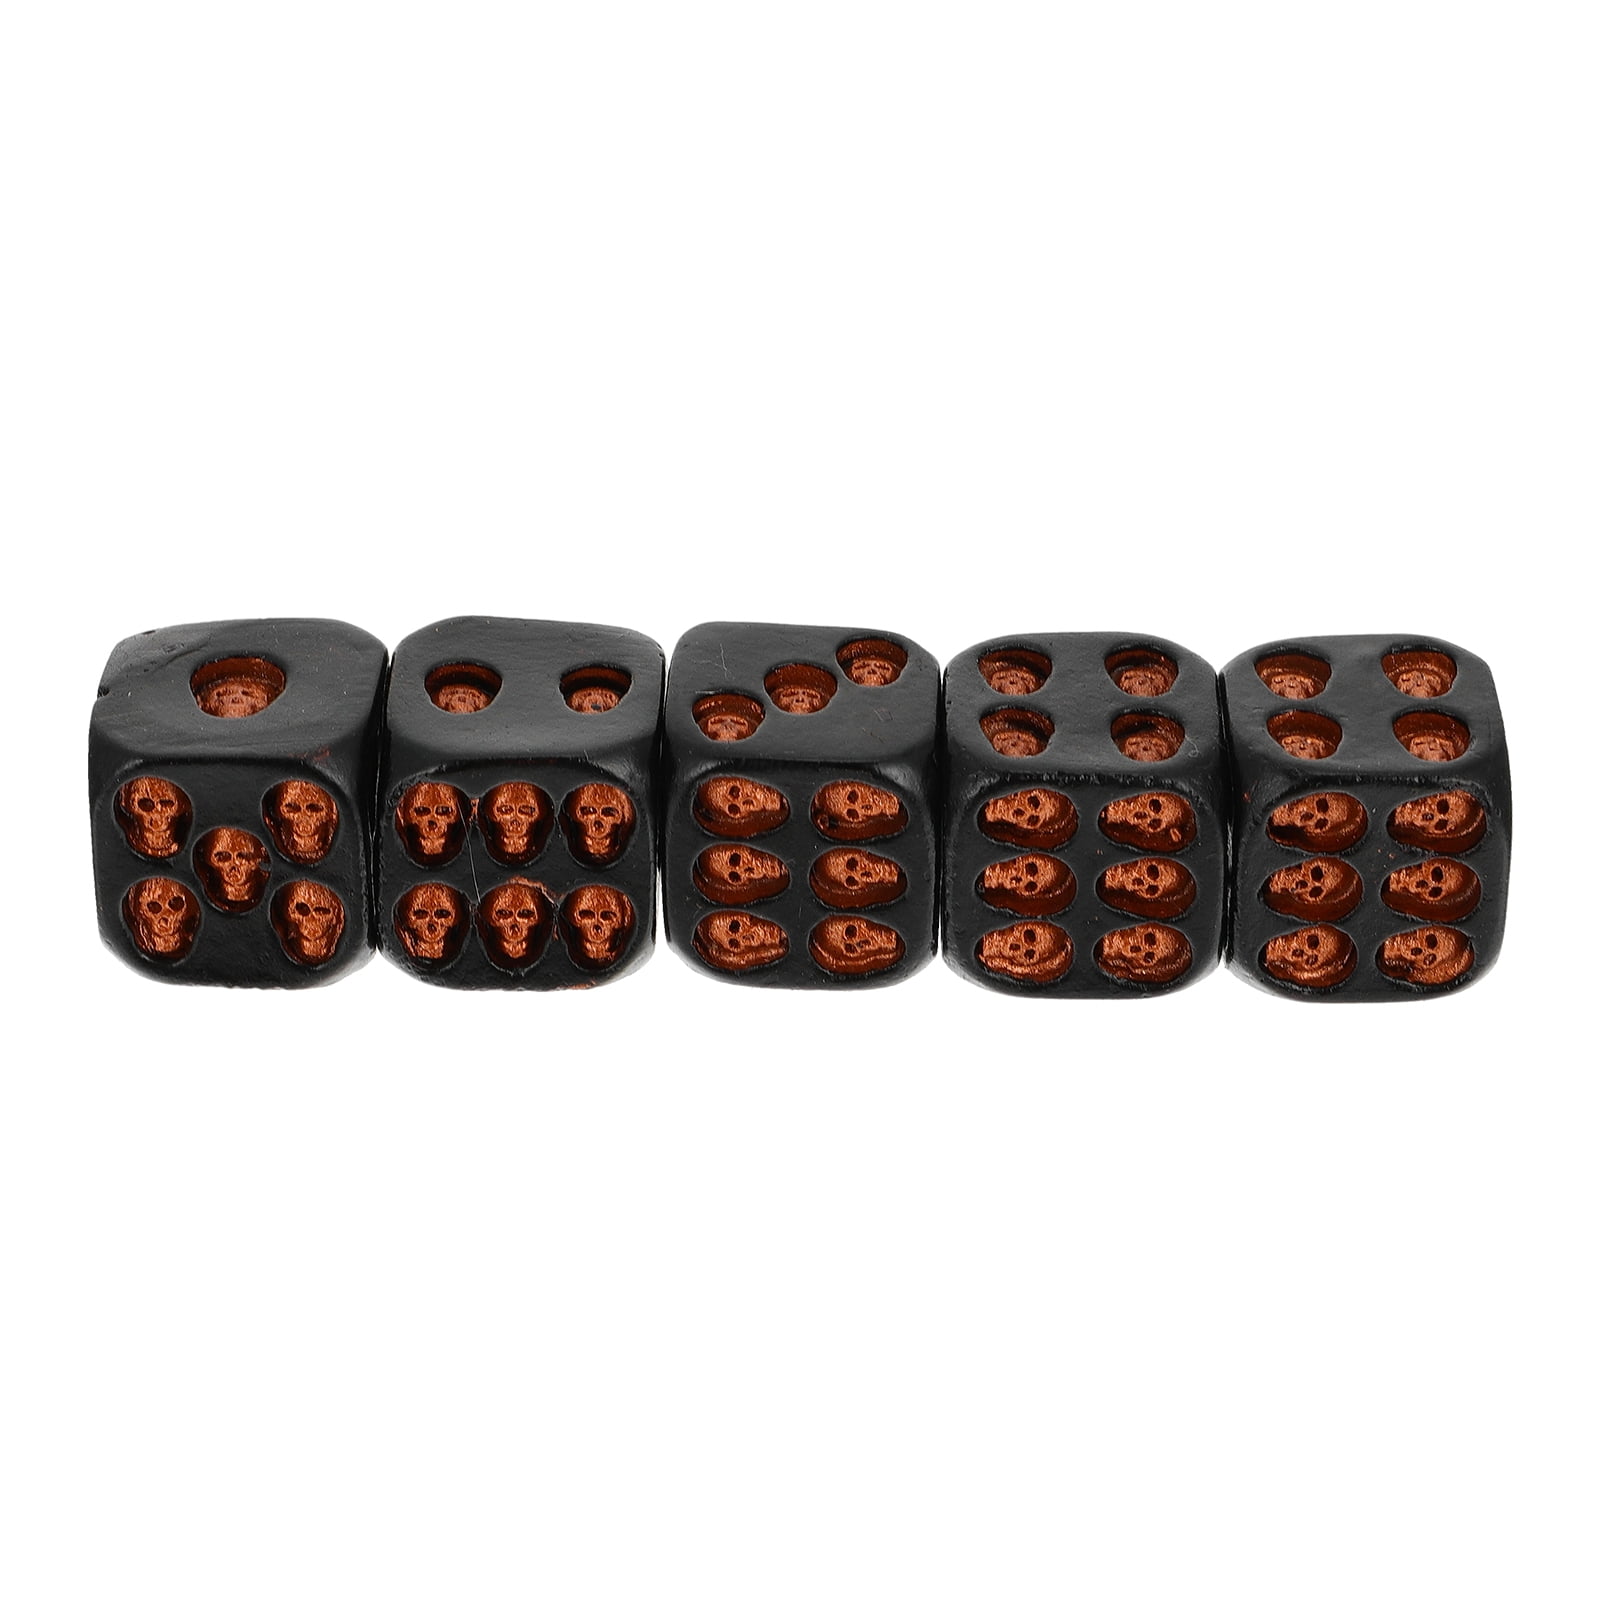 5 Pcs Decorative Black Resin 6-Sided Skull Dice Entertainment Role Playing Games 